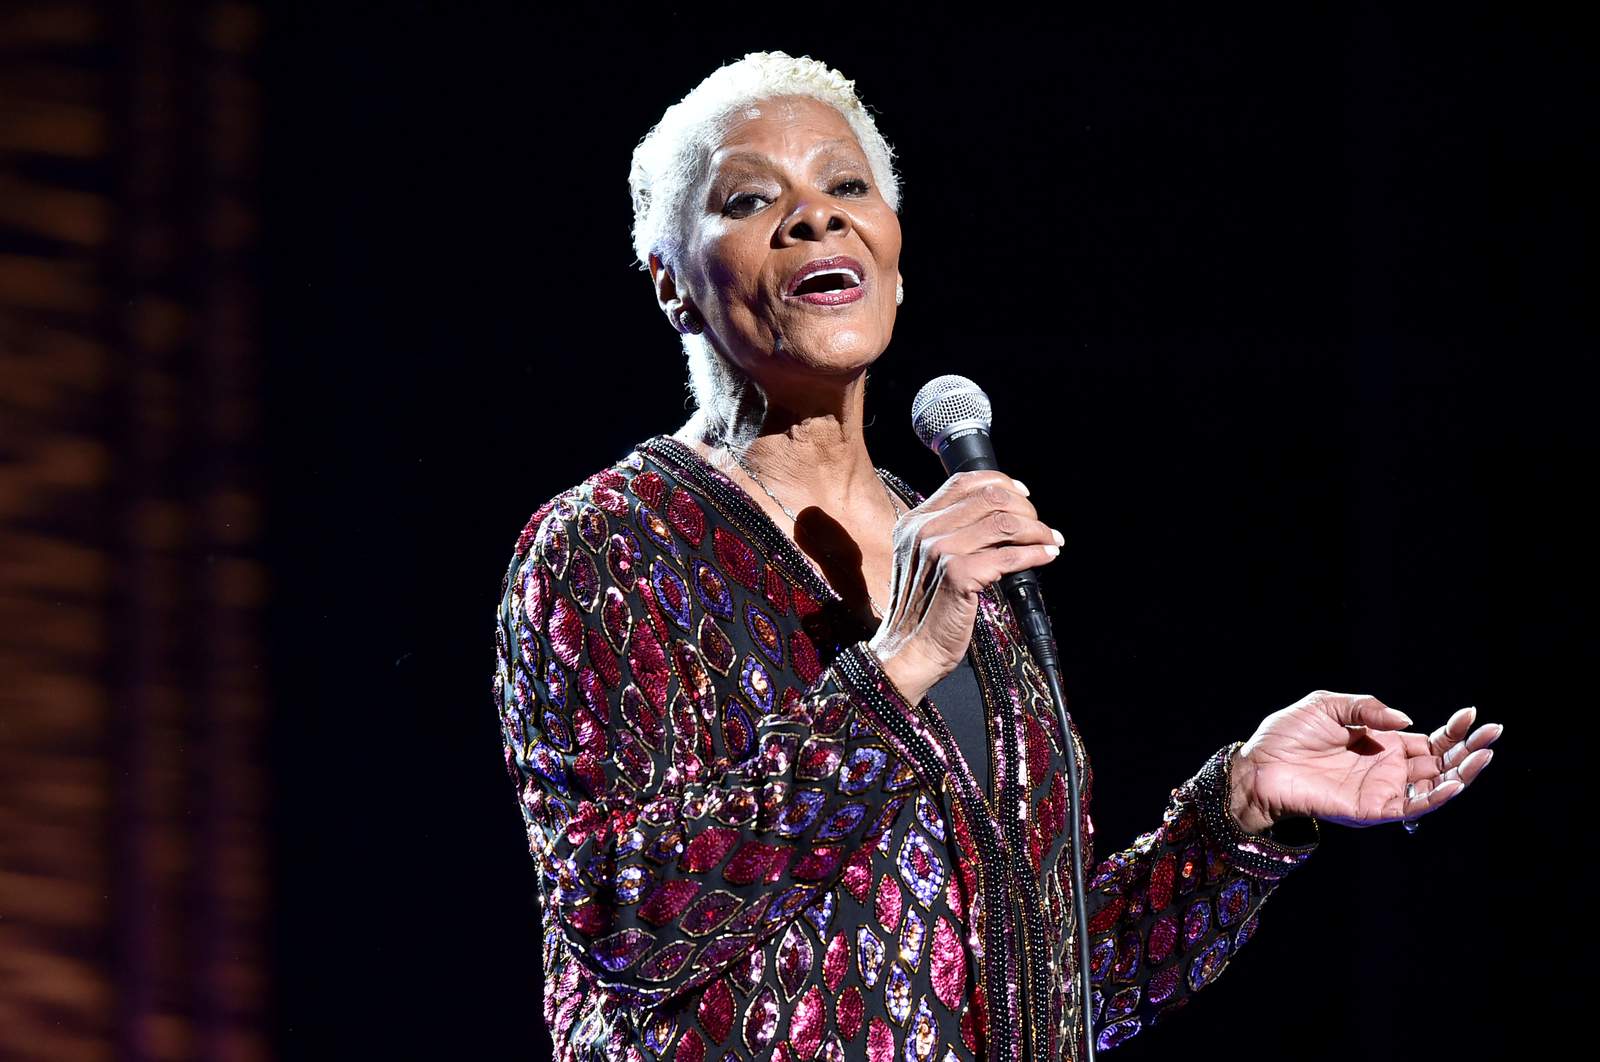 Dionne Warwick has been roasting celebrities on Twitter all weekend and it’s the funniest thing to happen this year